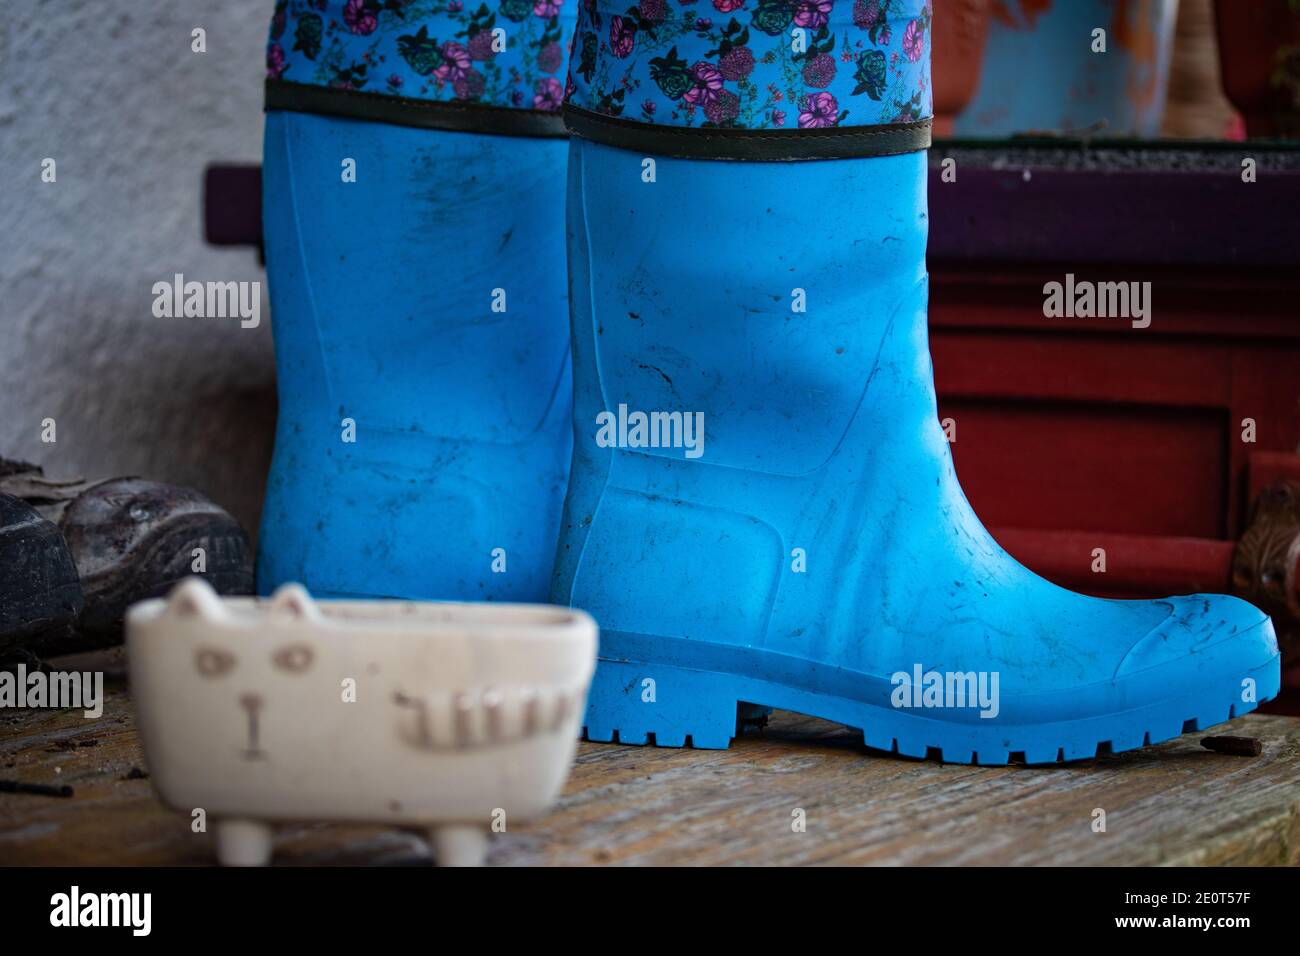 Old dirty rubber boots stand on the wooden floor of a country house porch. Blue rubber country goloshes. Ireland Stock Photo